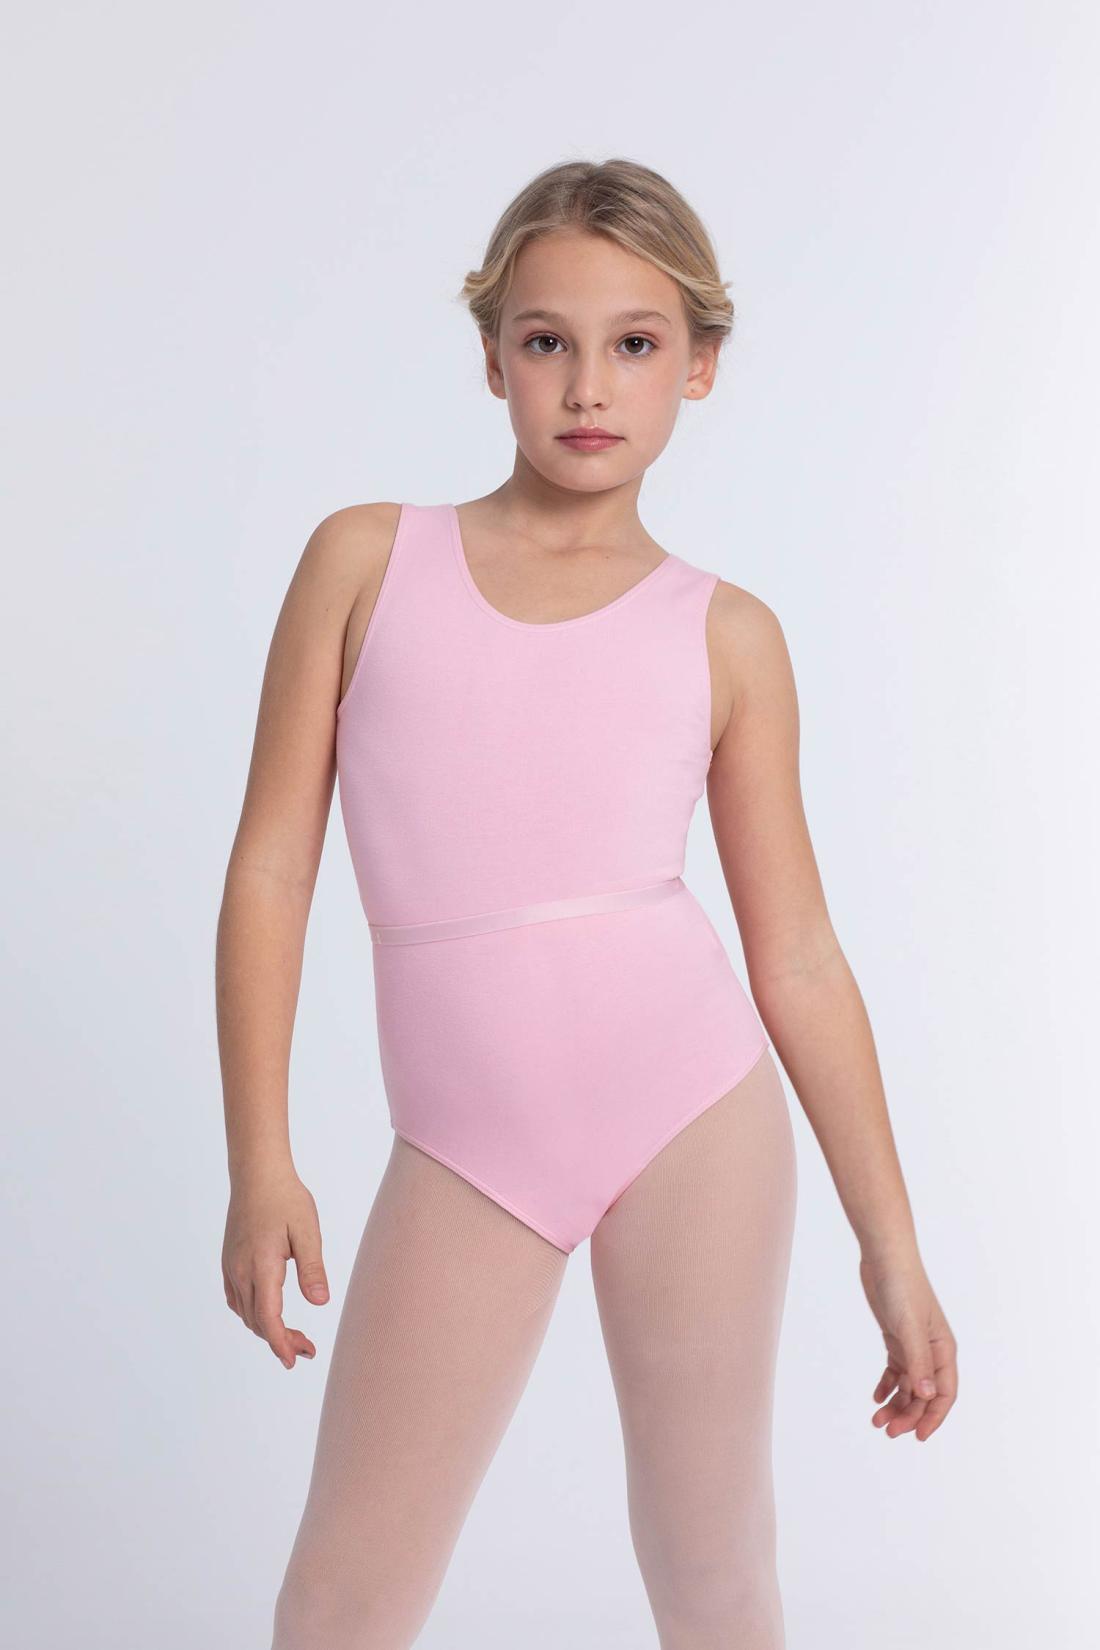 Classic ballet leotard with matching belt for girls in Cotton fabric Intermezzo dance